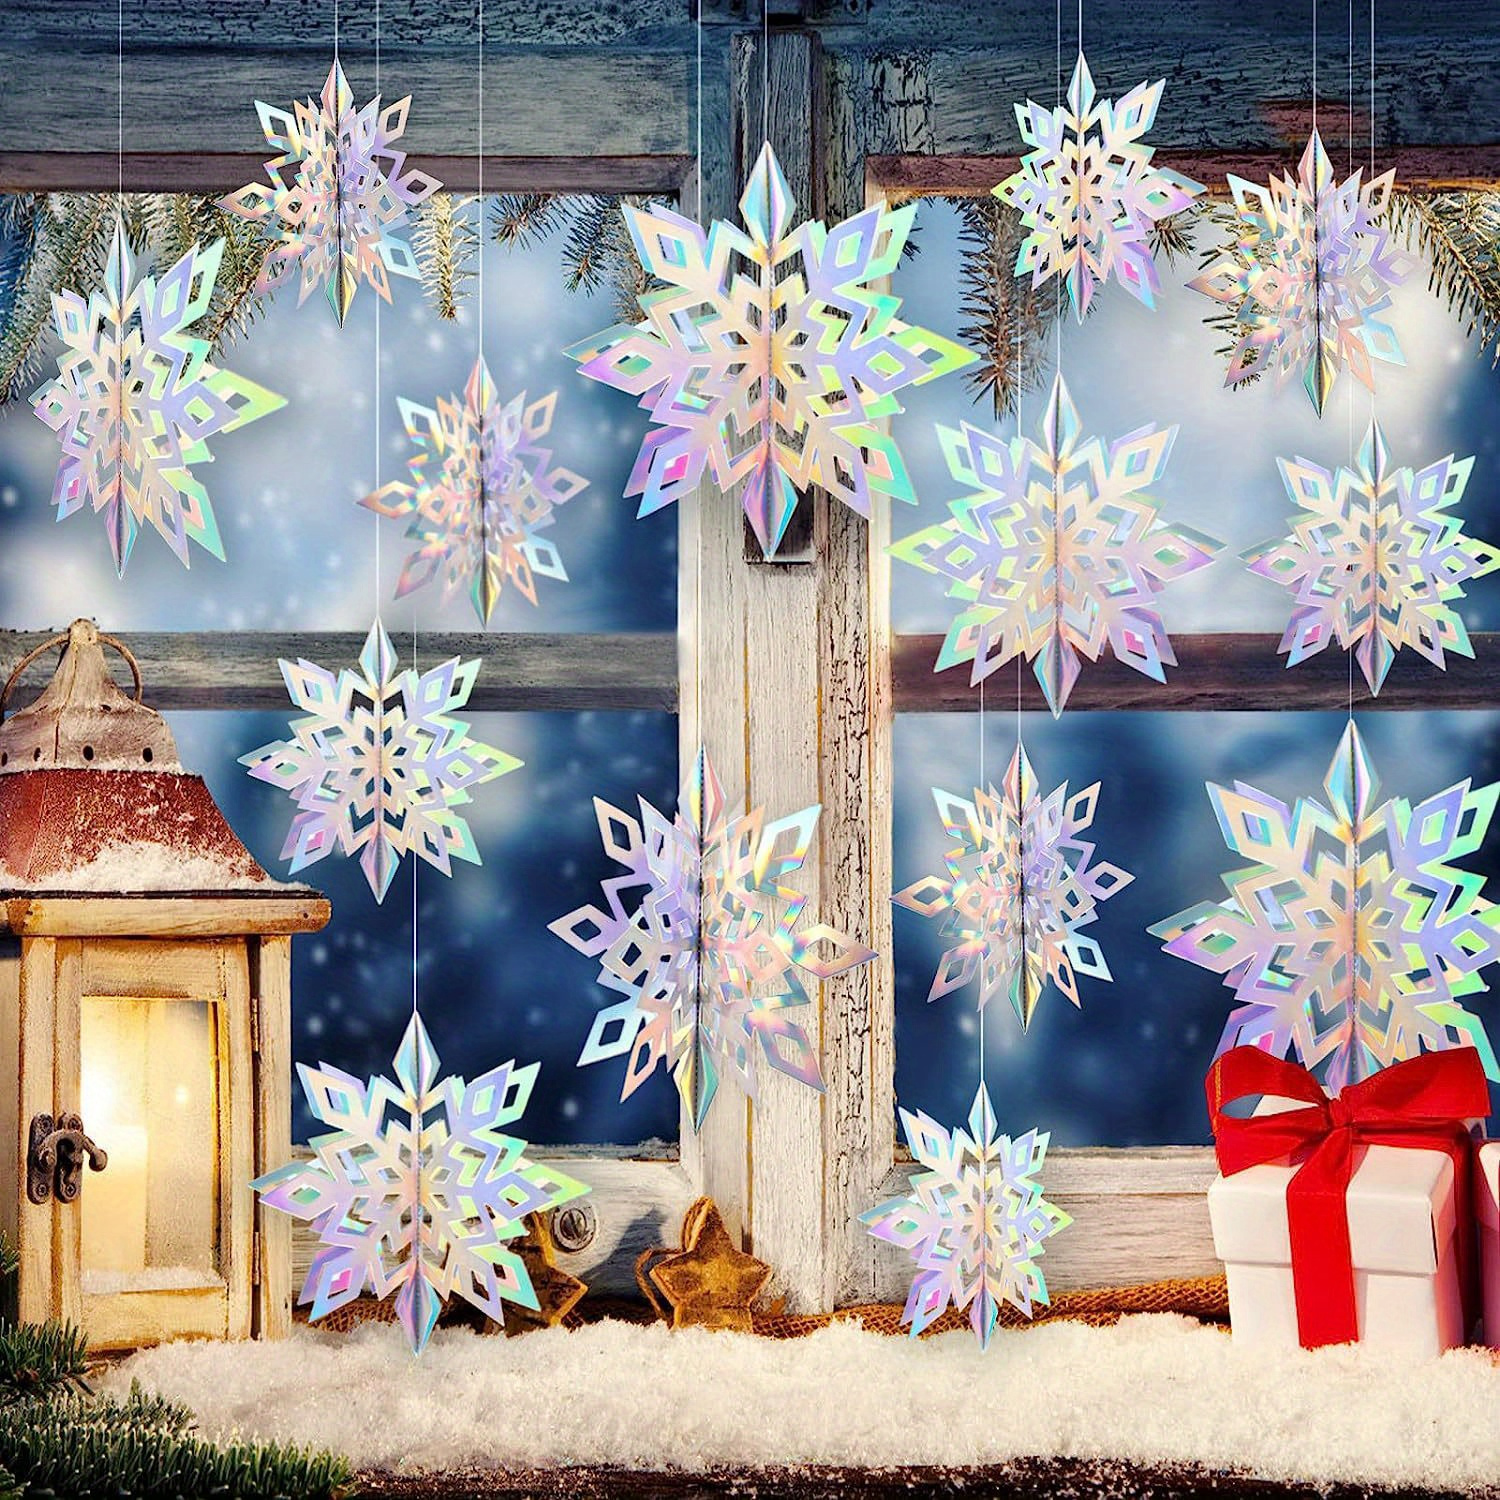 Simple snowflake decoration ideas for Holidays ❄️ • Happythought